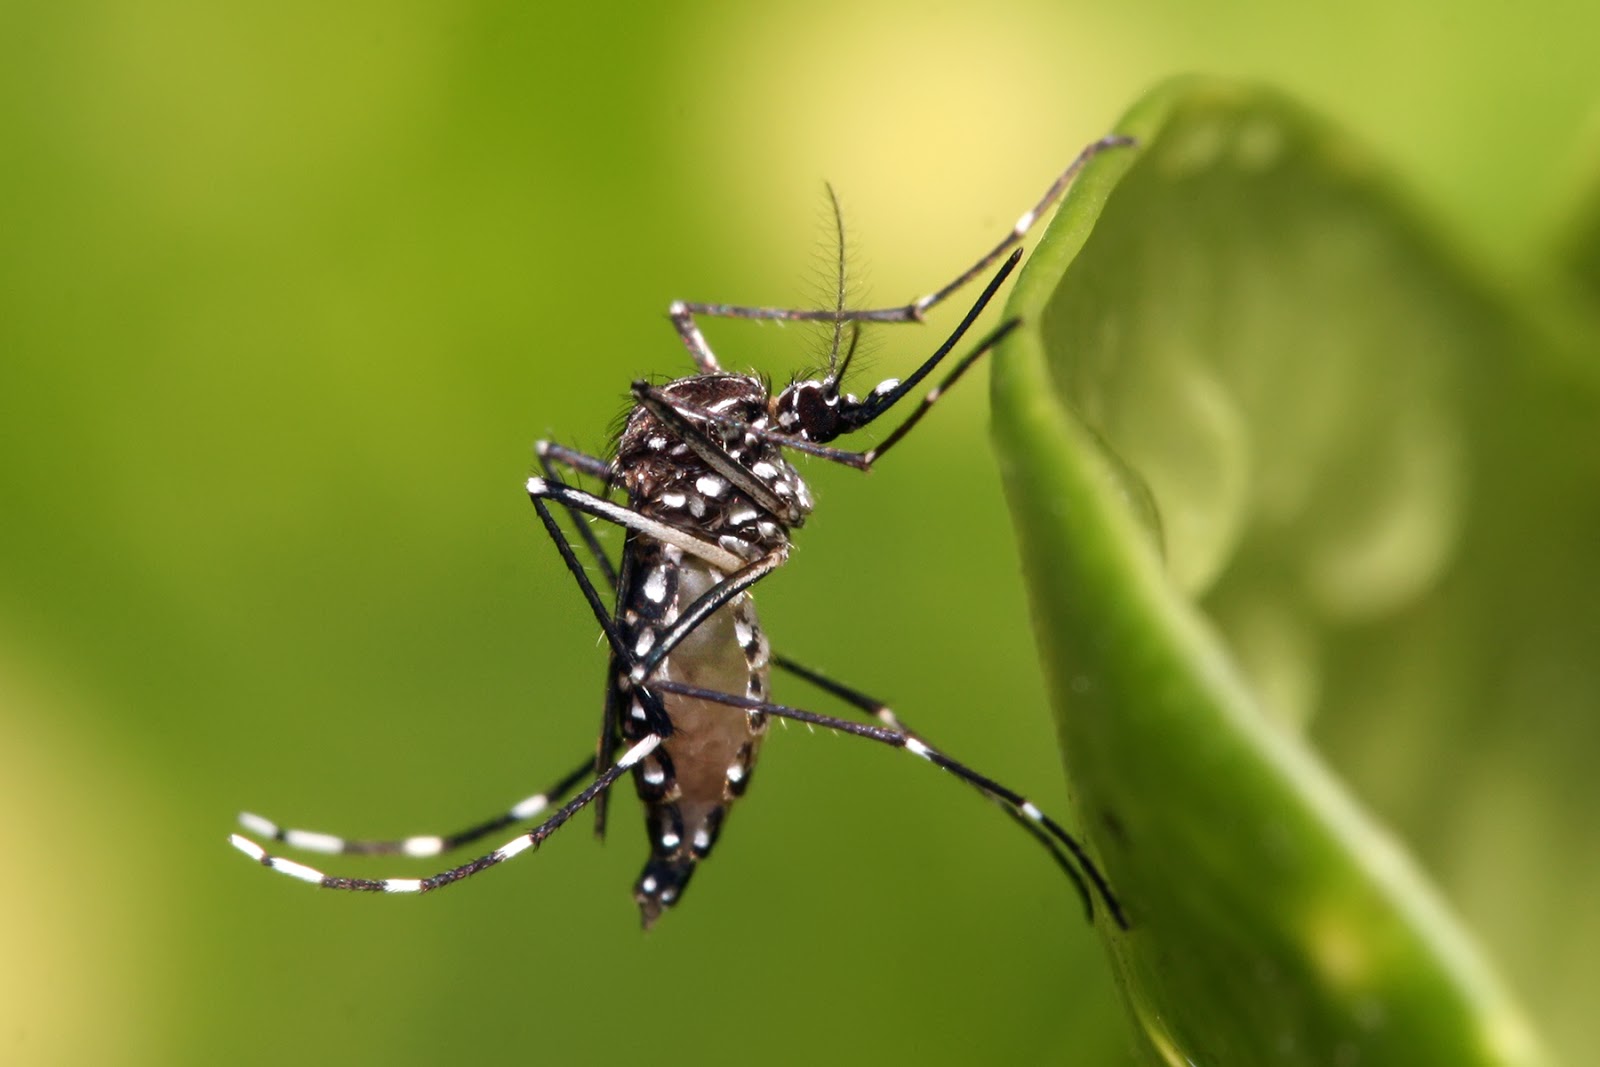 Zika Virus – What we know and what we don’t